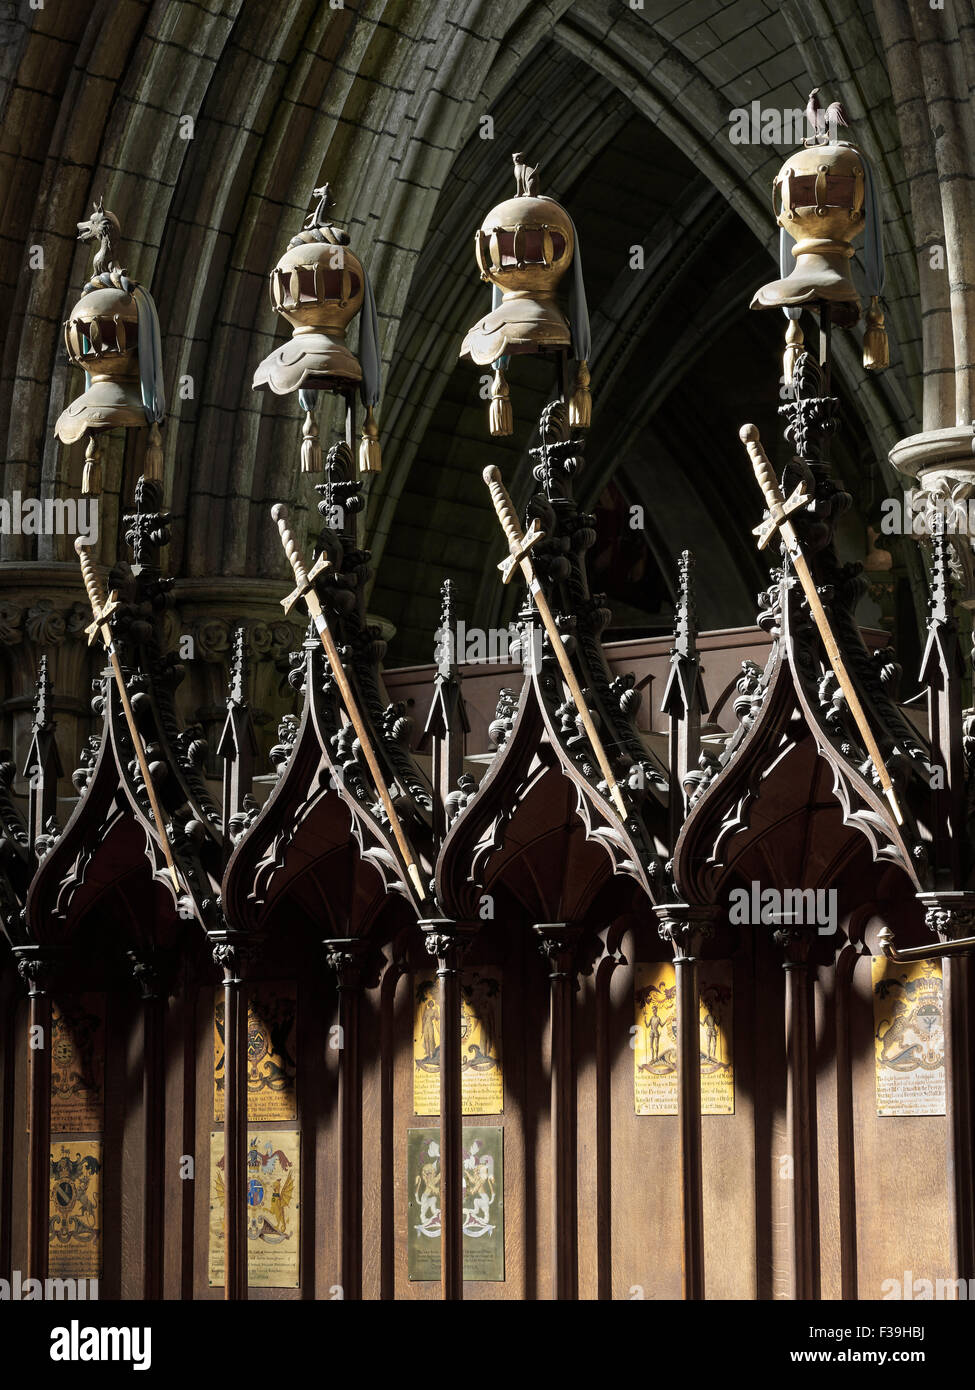 St Patrick's Cathedral Dublin choir stalls Stock Photo